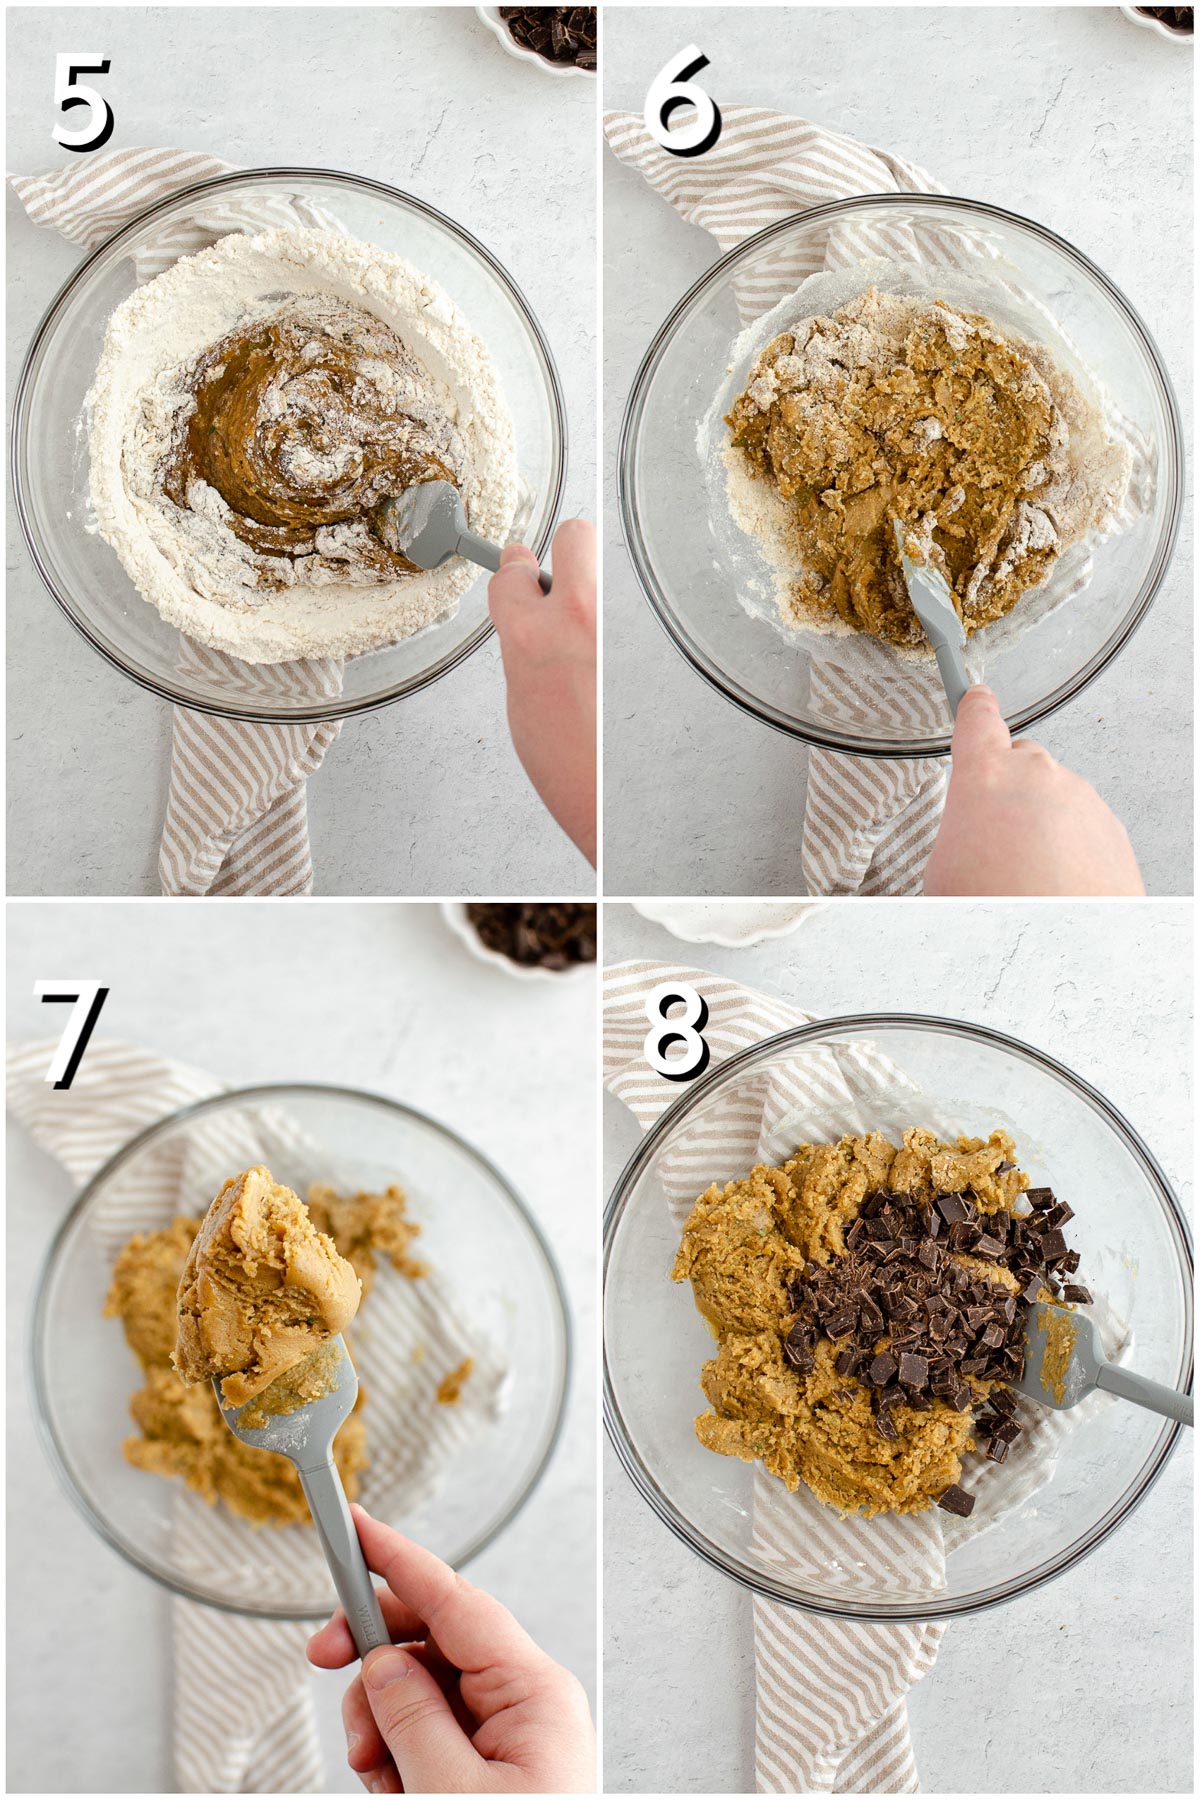 Combining dry ingredients into wet ingredients and stirring to form cookie dough. Then, adding chocolate chunks.